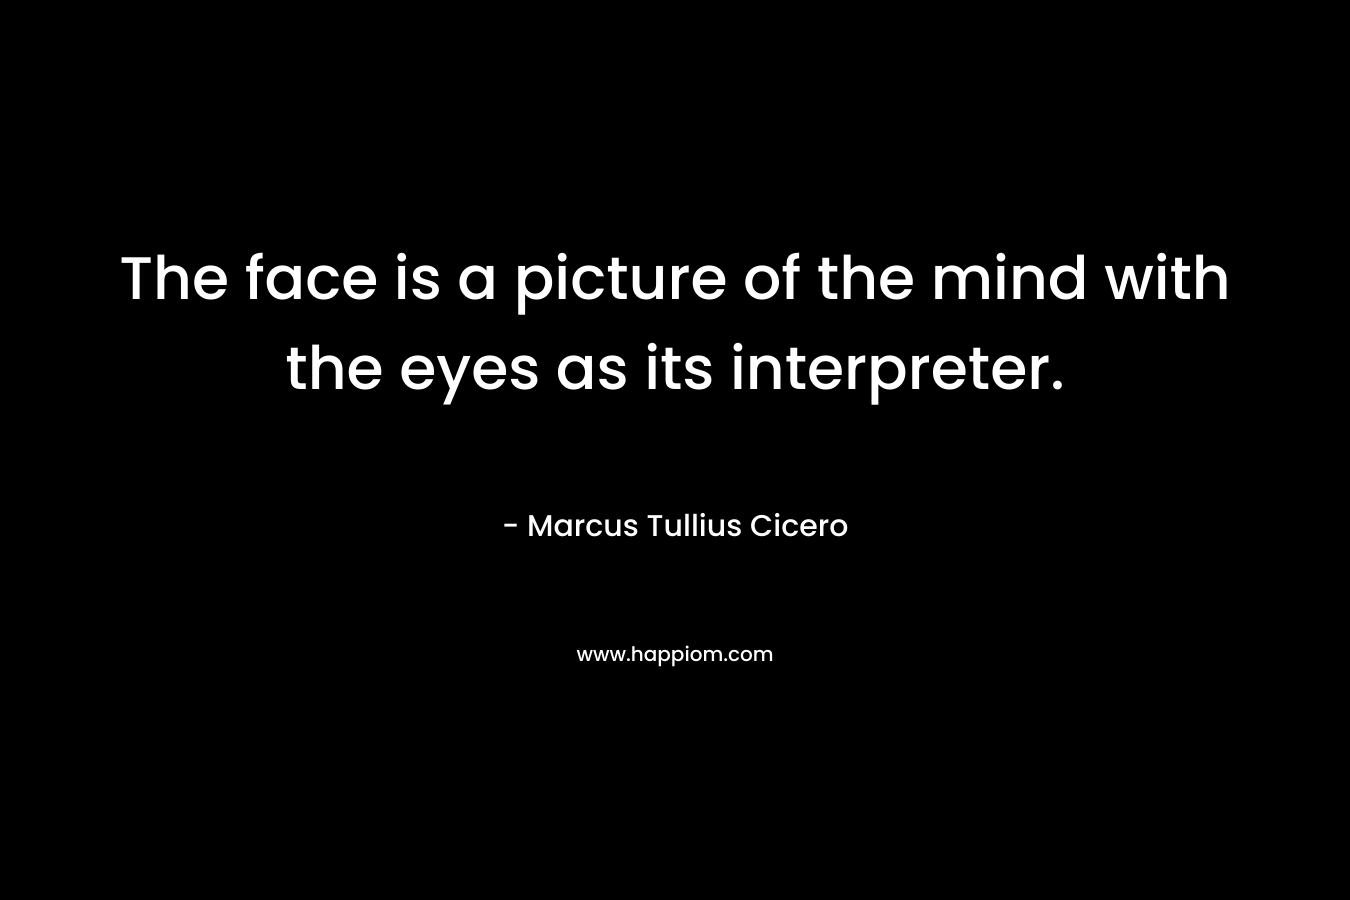 The face is a picture of the mind with the eyes as its interpreter.